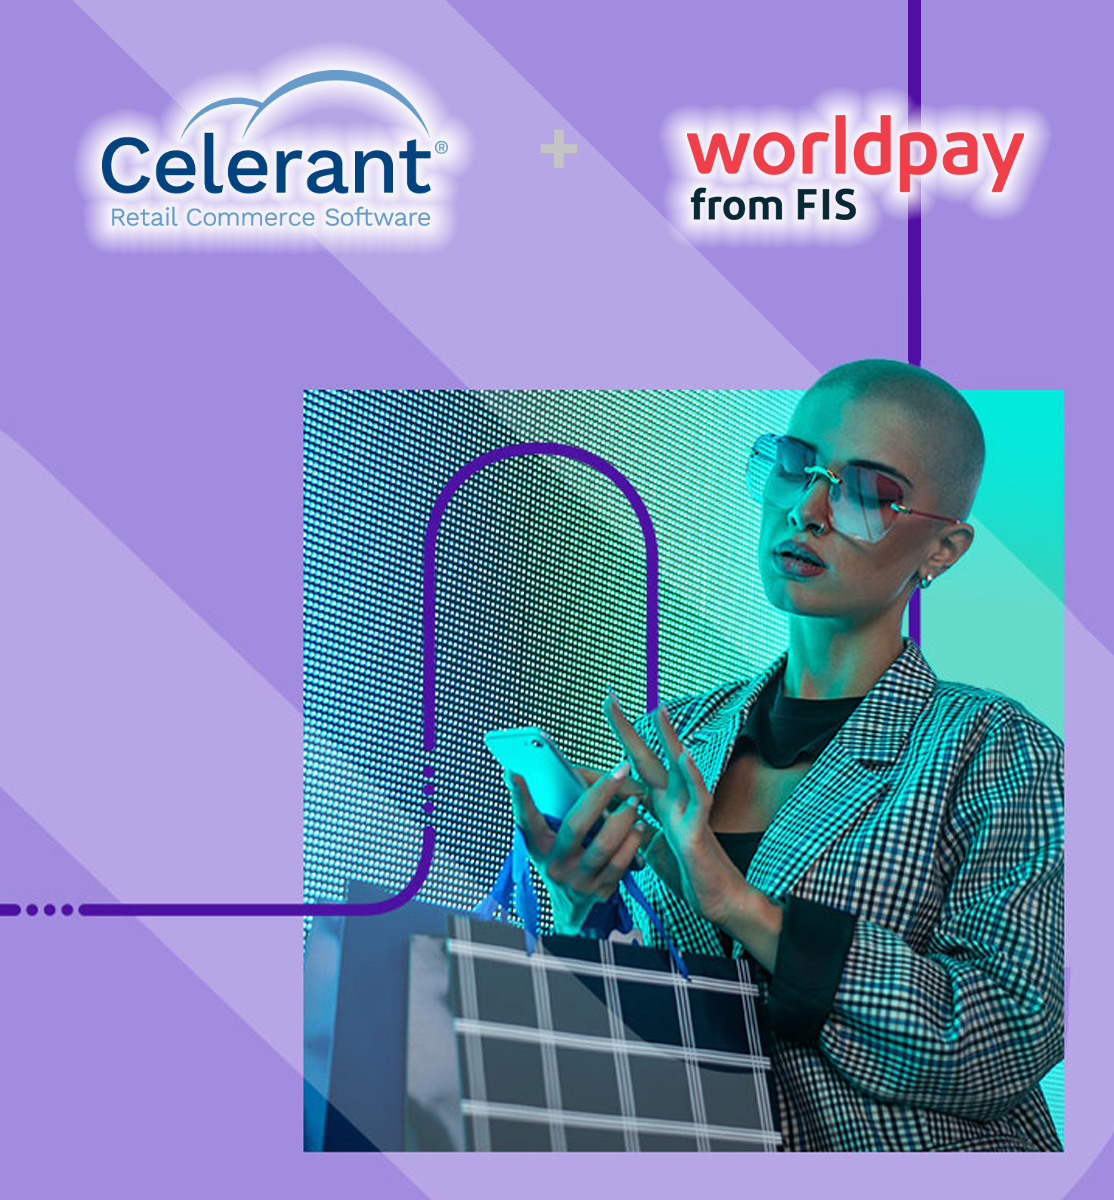 Celerant and Worldpay from FIS